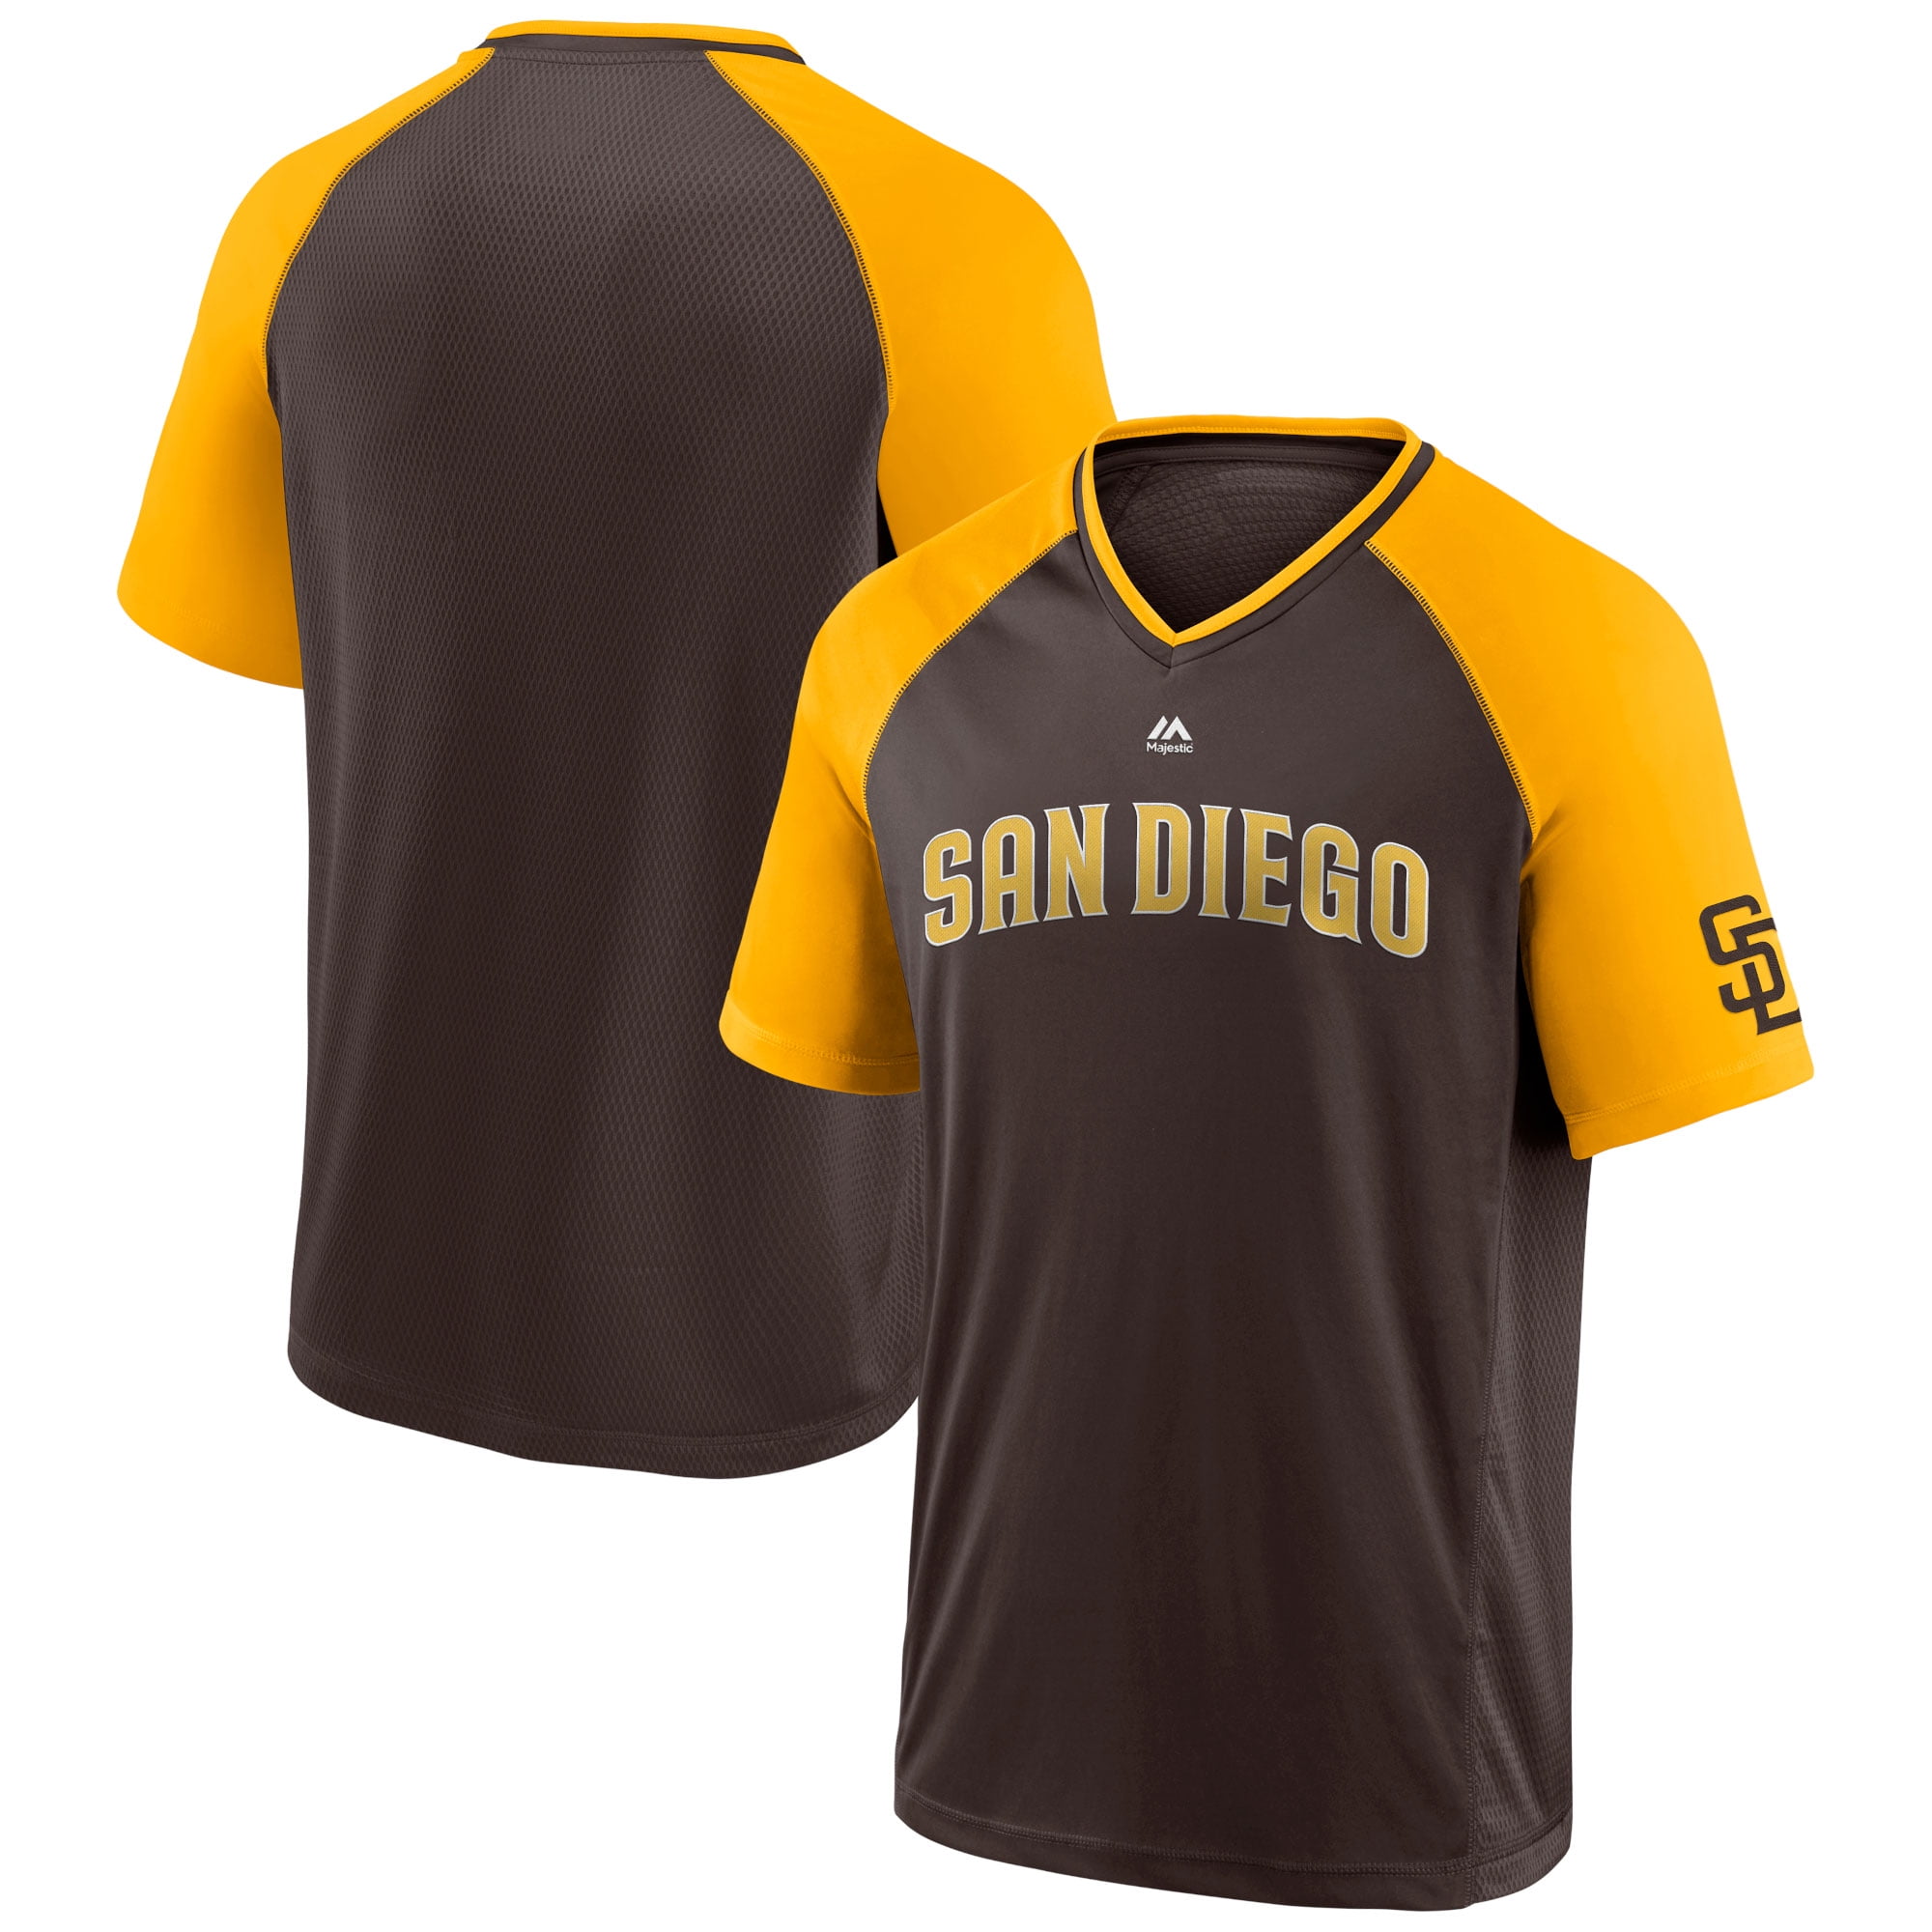 padres gold jersey